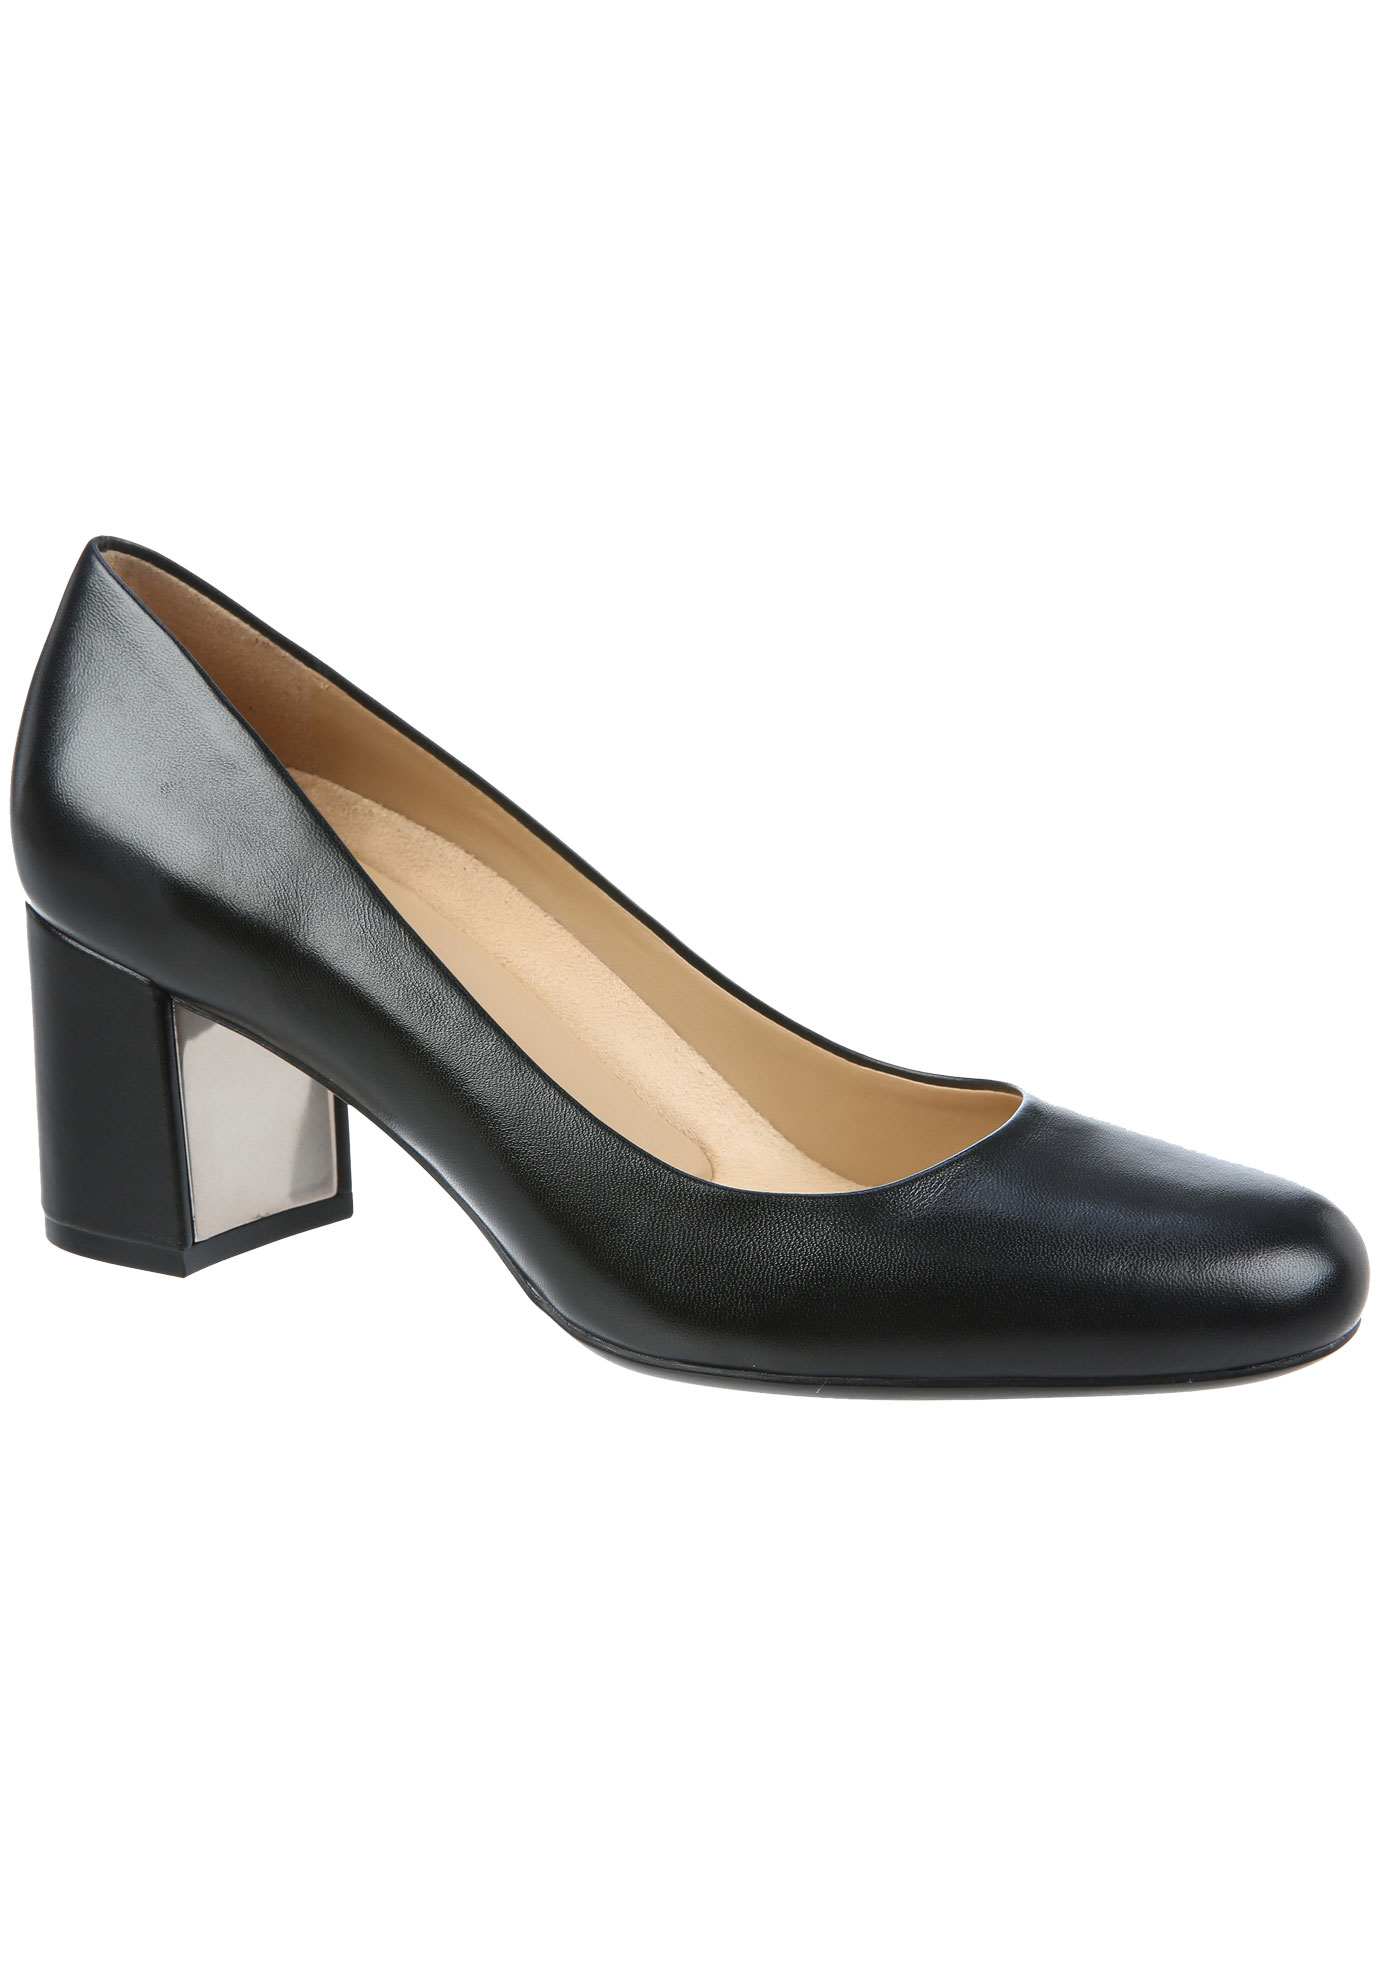 whitney pumps by naturalizer